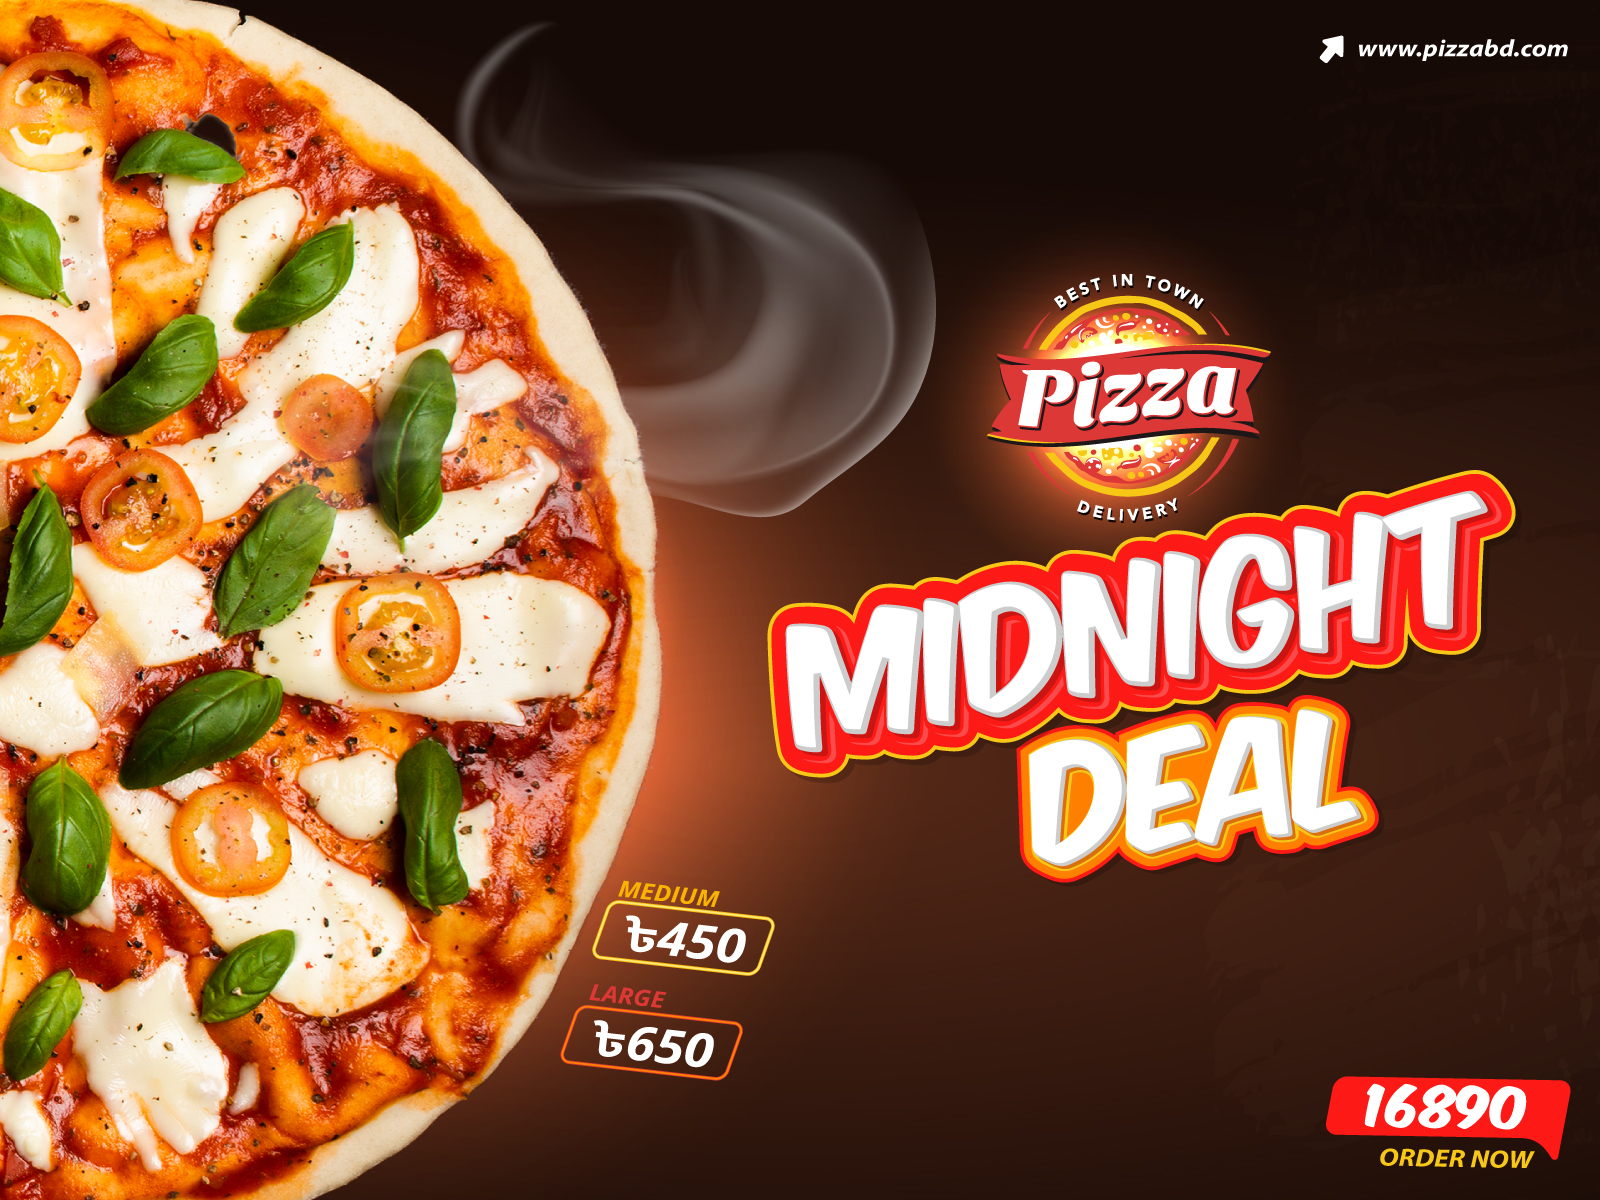 Pizza Advertisement Realistic Composition by Jamil Sujon on Dribbble